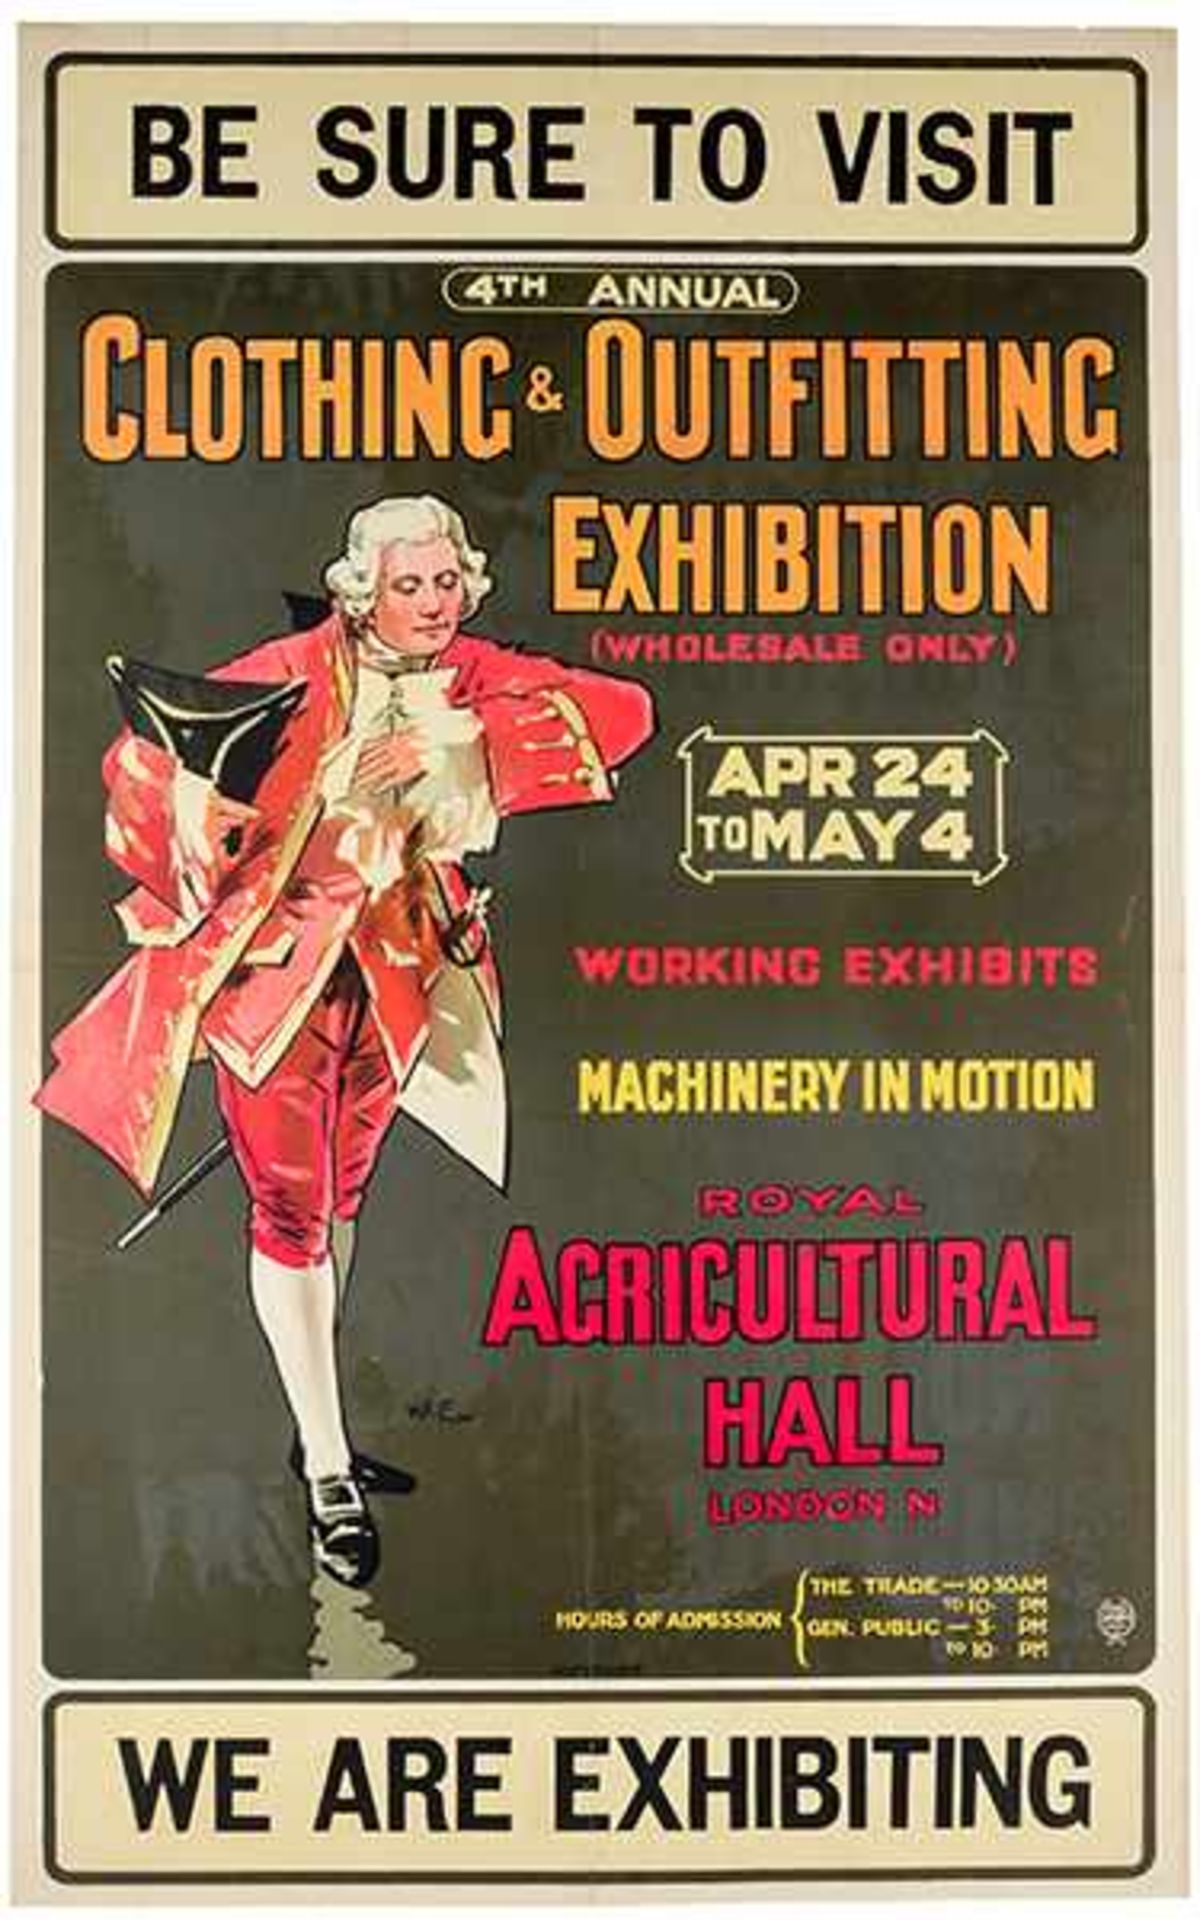 Plakate - - Fourth annual clothing and outfitting exhibition. Farbig lithographiertes Plakat.